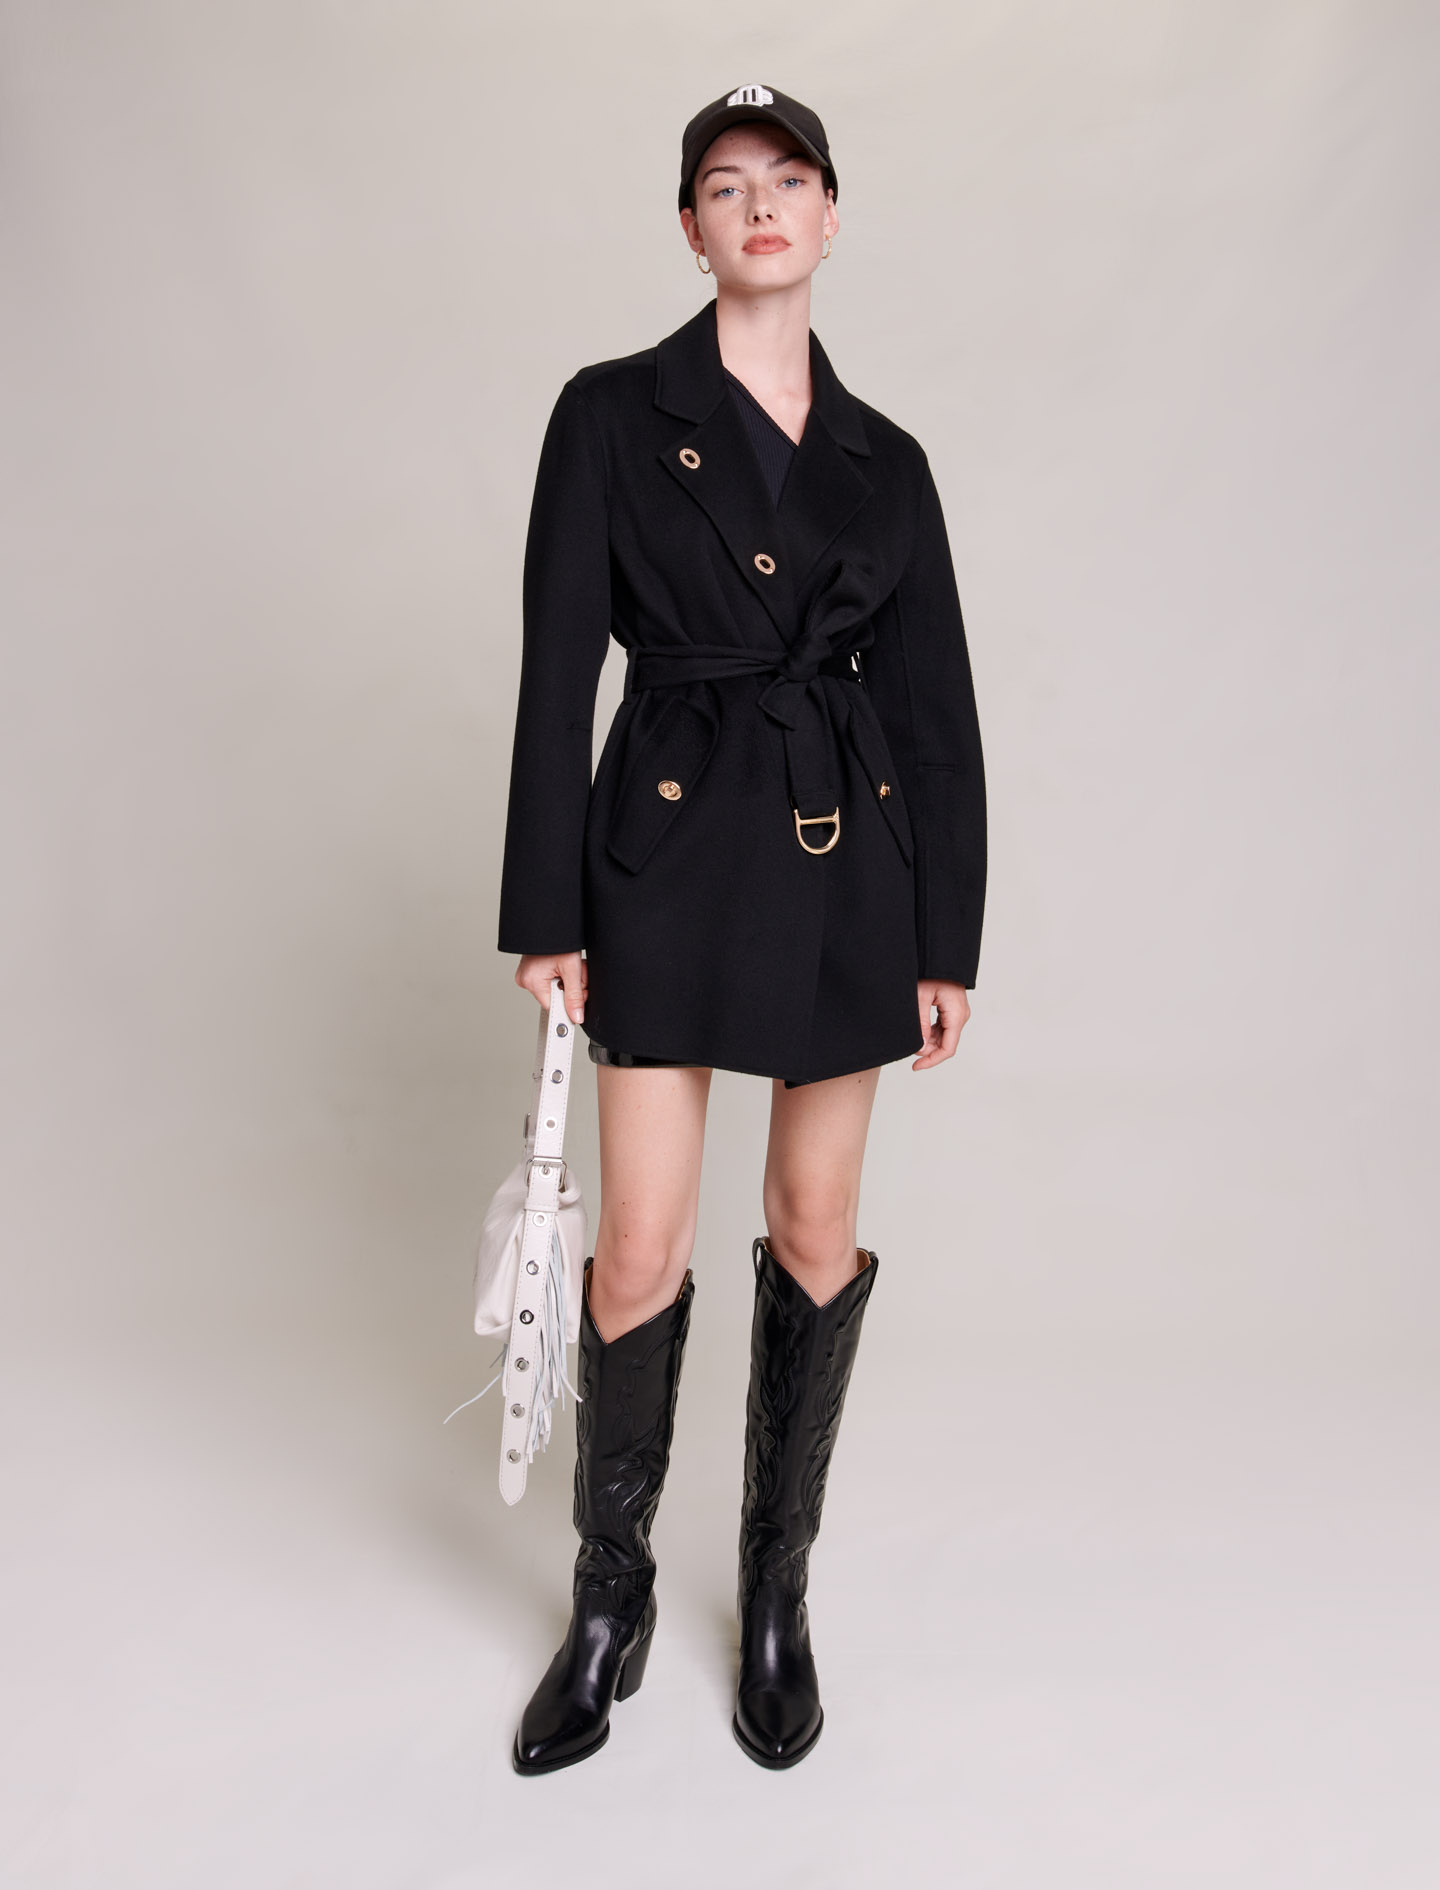 Maje Woman's wool, Tweed coat for Fall/Winter, in color Black / Black